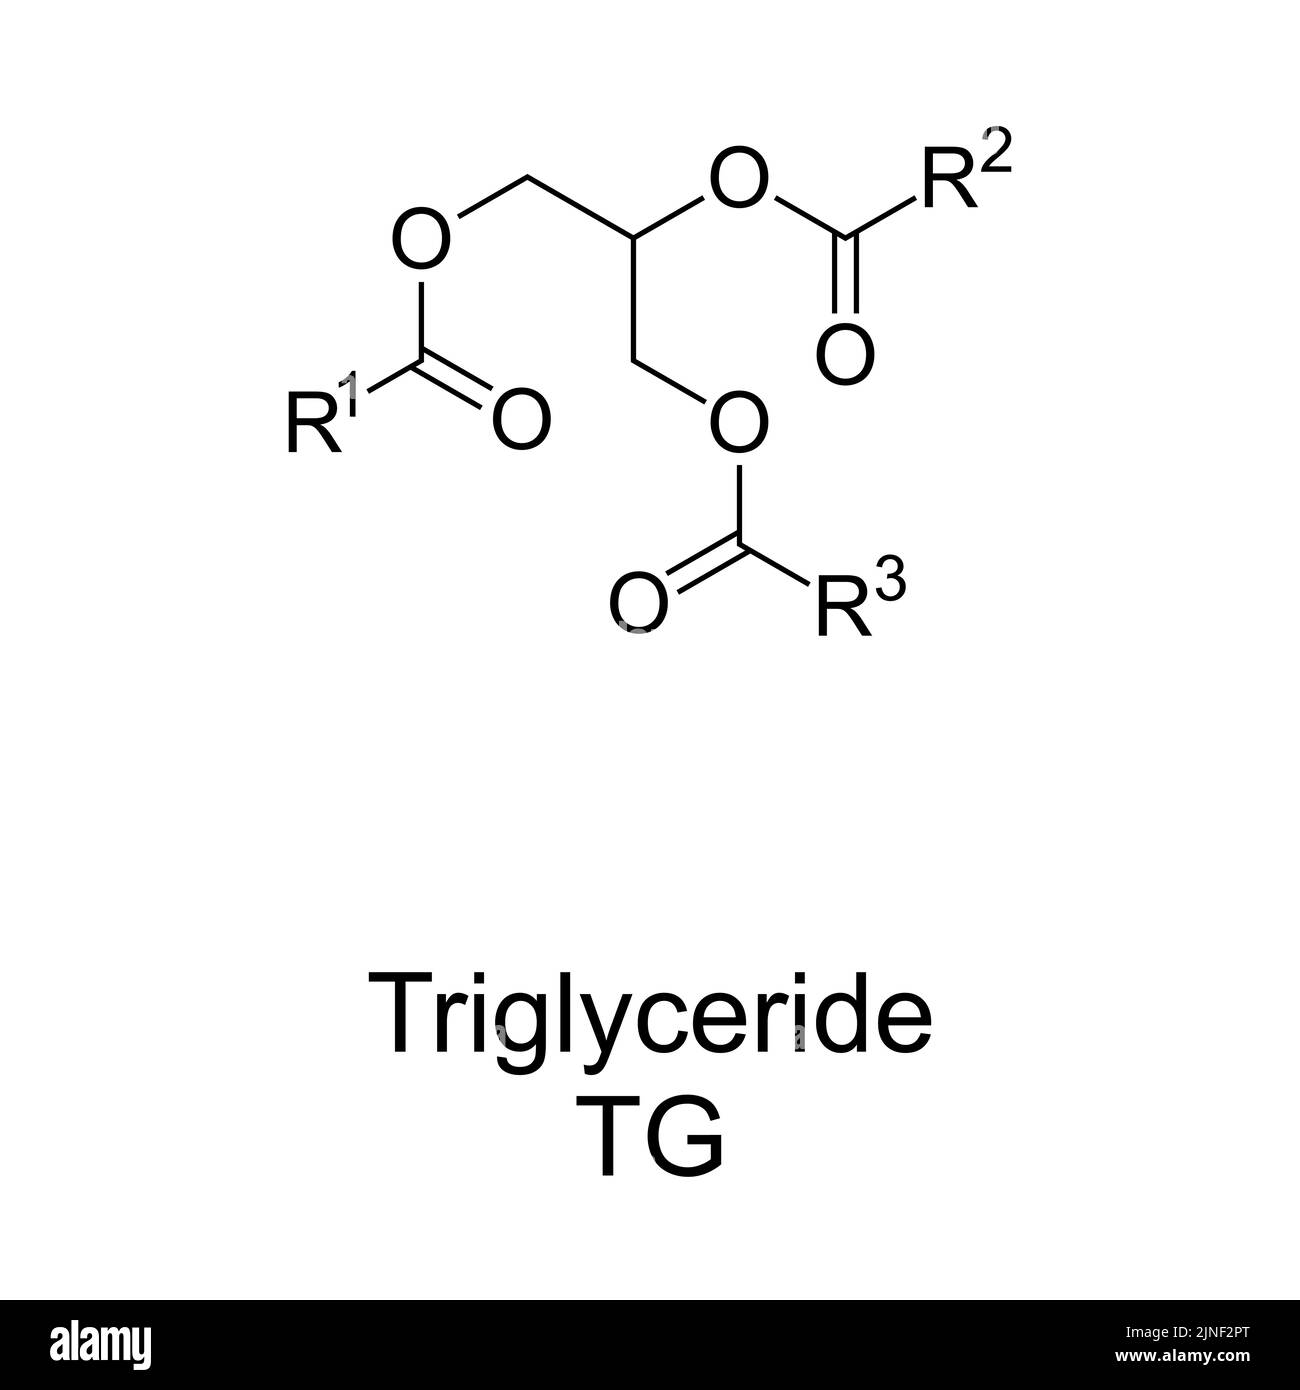 Triglyceride chemical structure. Triacylglycerol or triacylglyceride, ester derived from glycerol and 3 fatty acids. Main constituents of body fat. Stock Photo